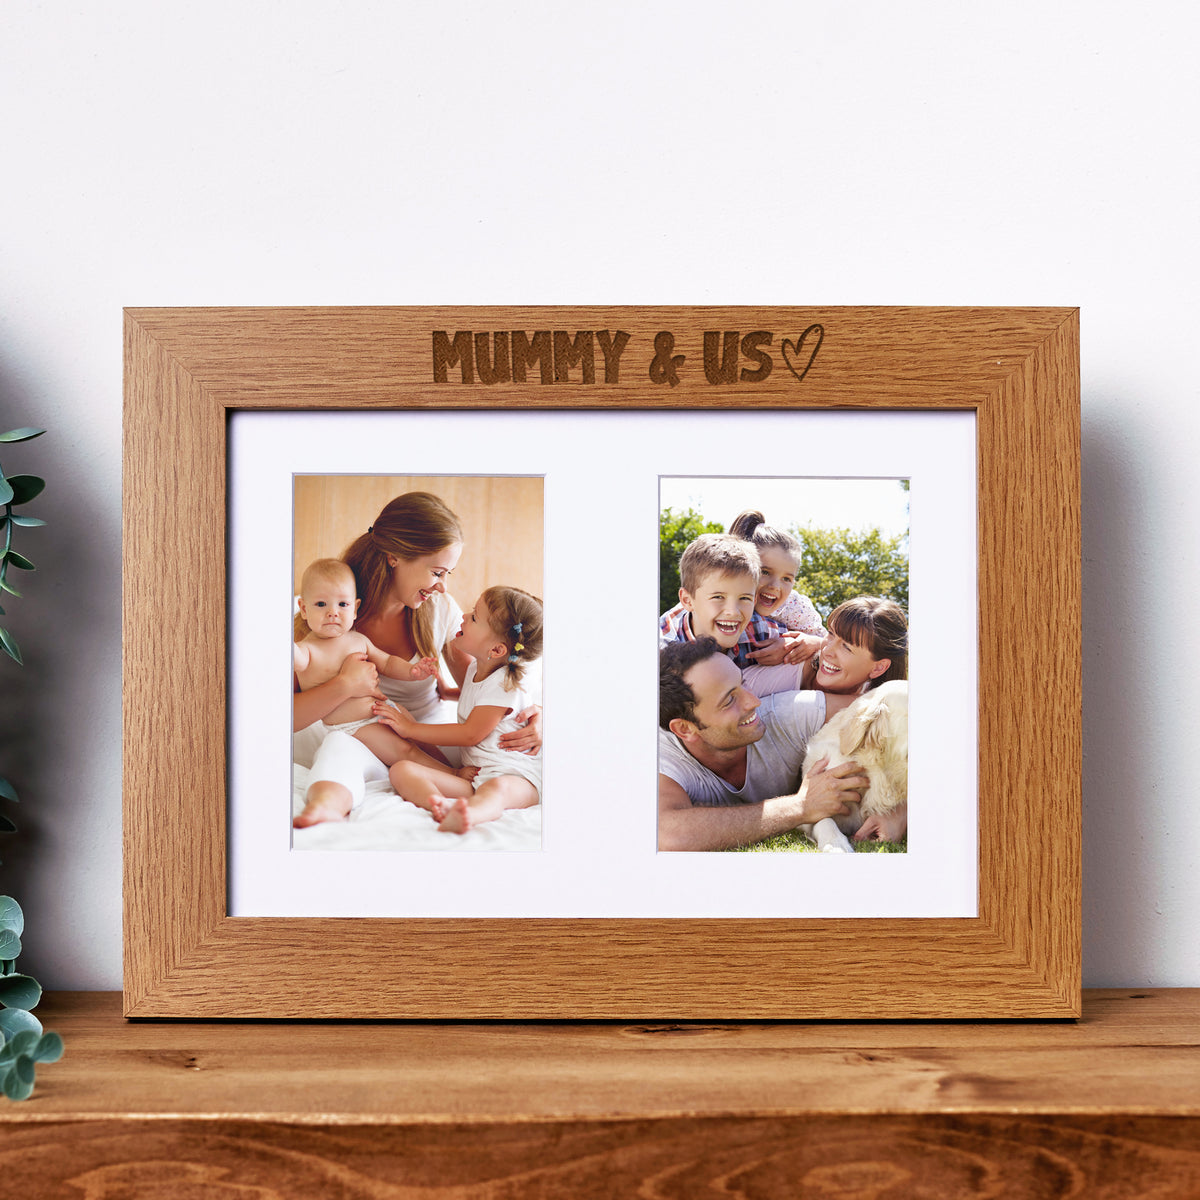 Mummy and Us Photo Picture Frame Double 6x4 Inch